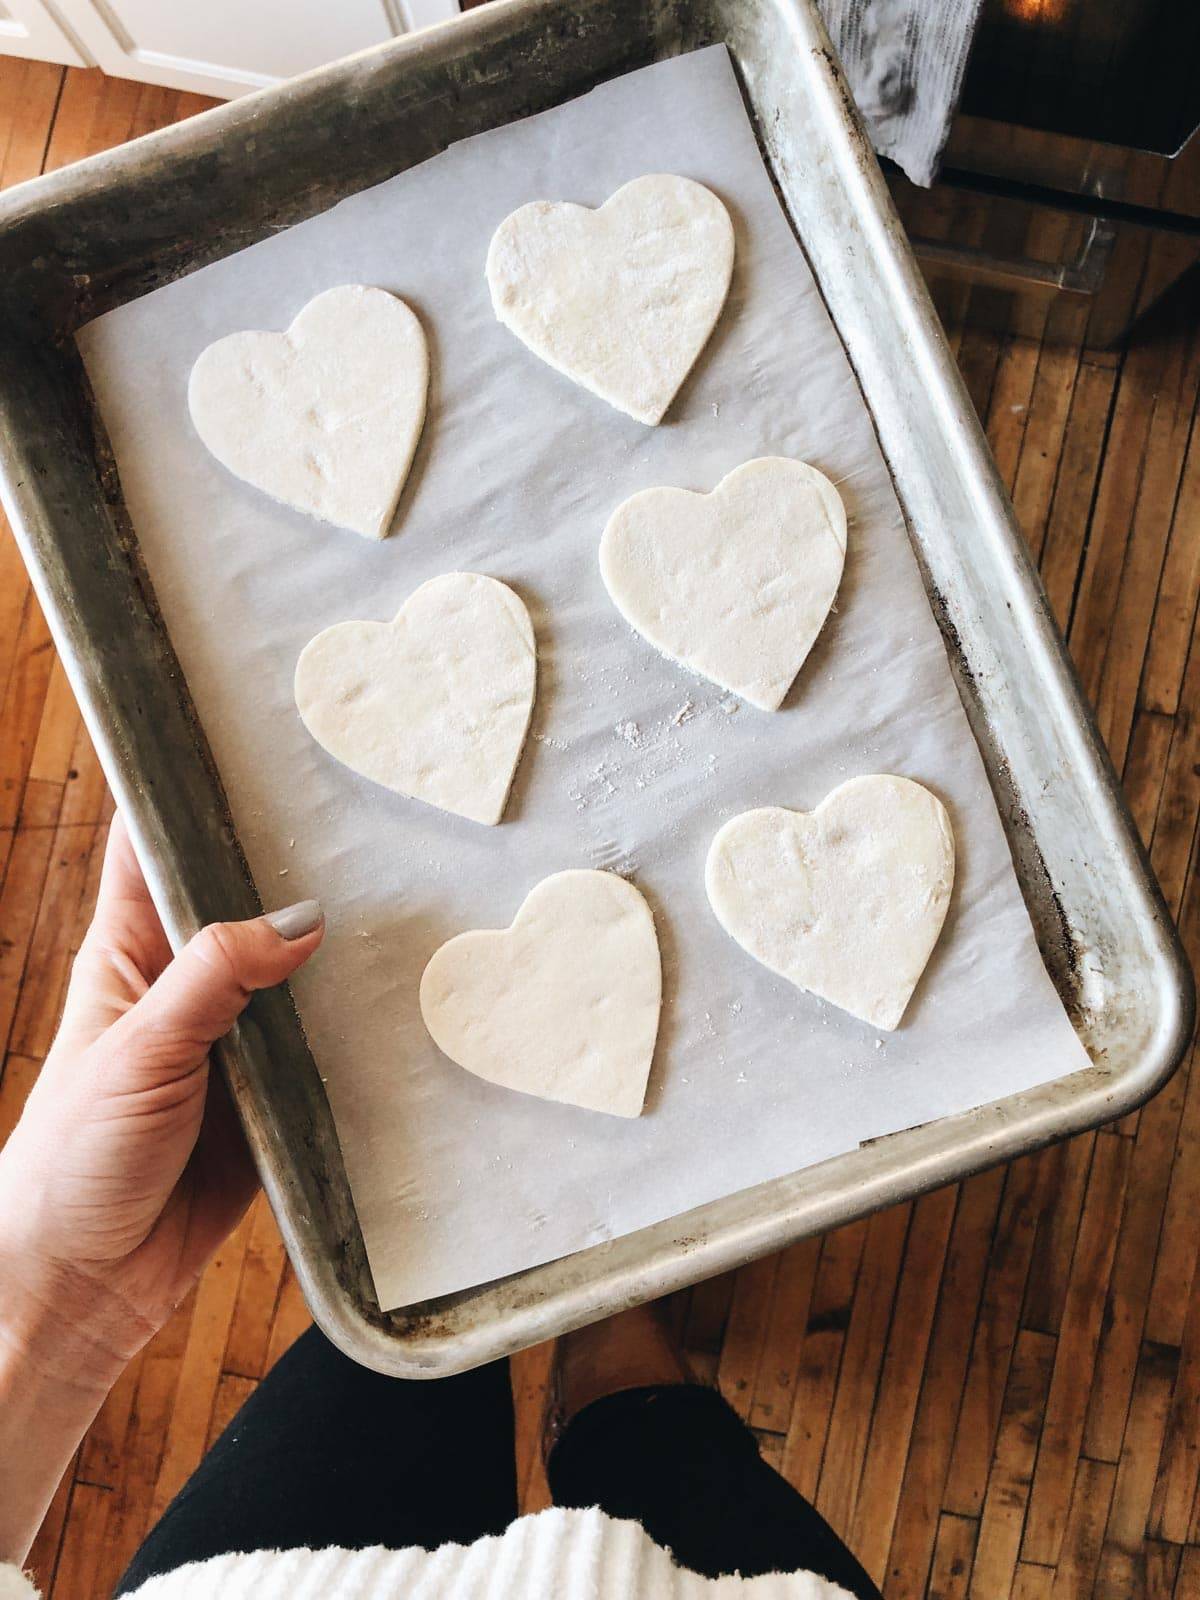 Puff pastry in heart shapes on pan before baking.